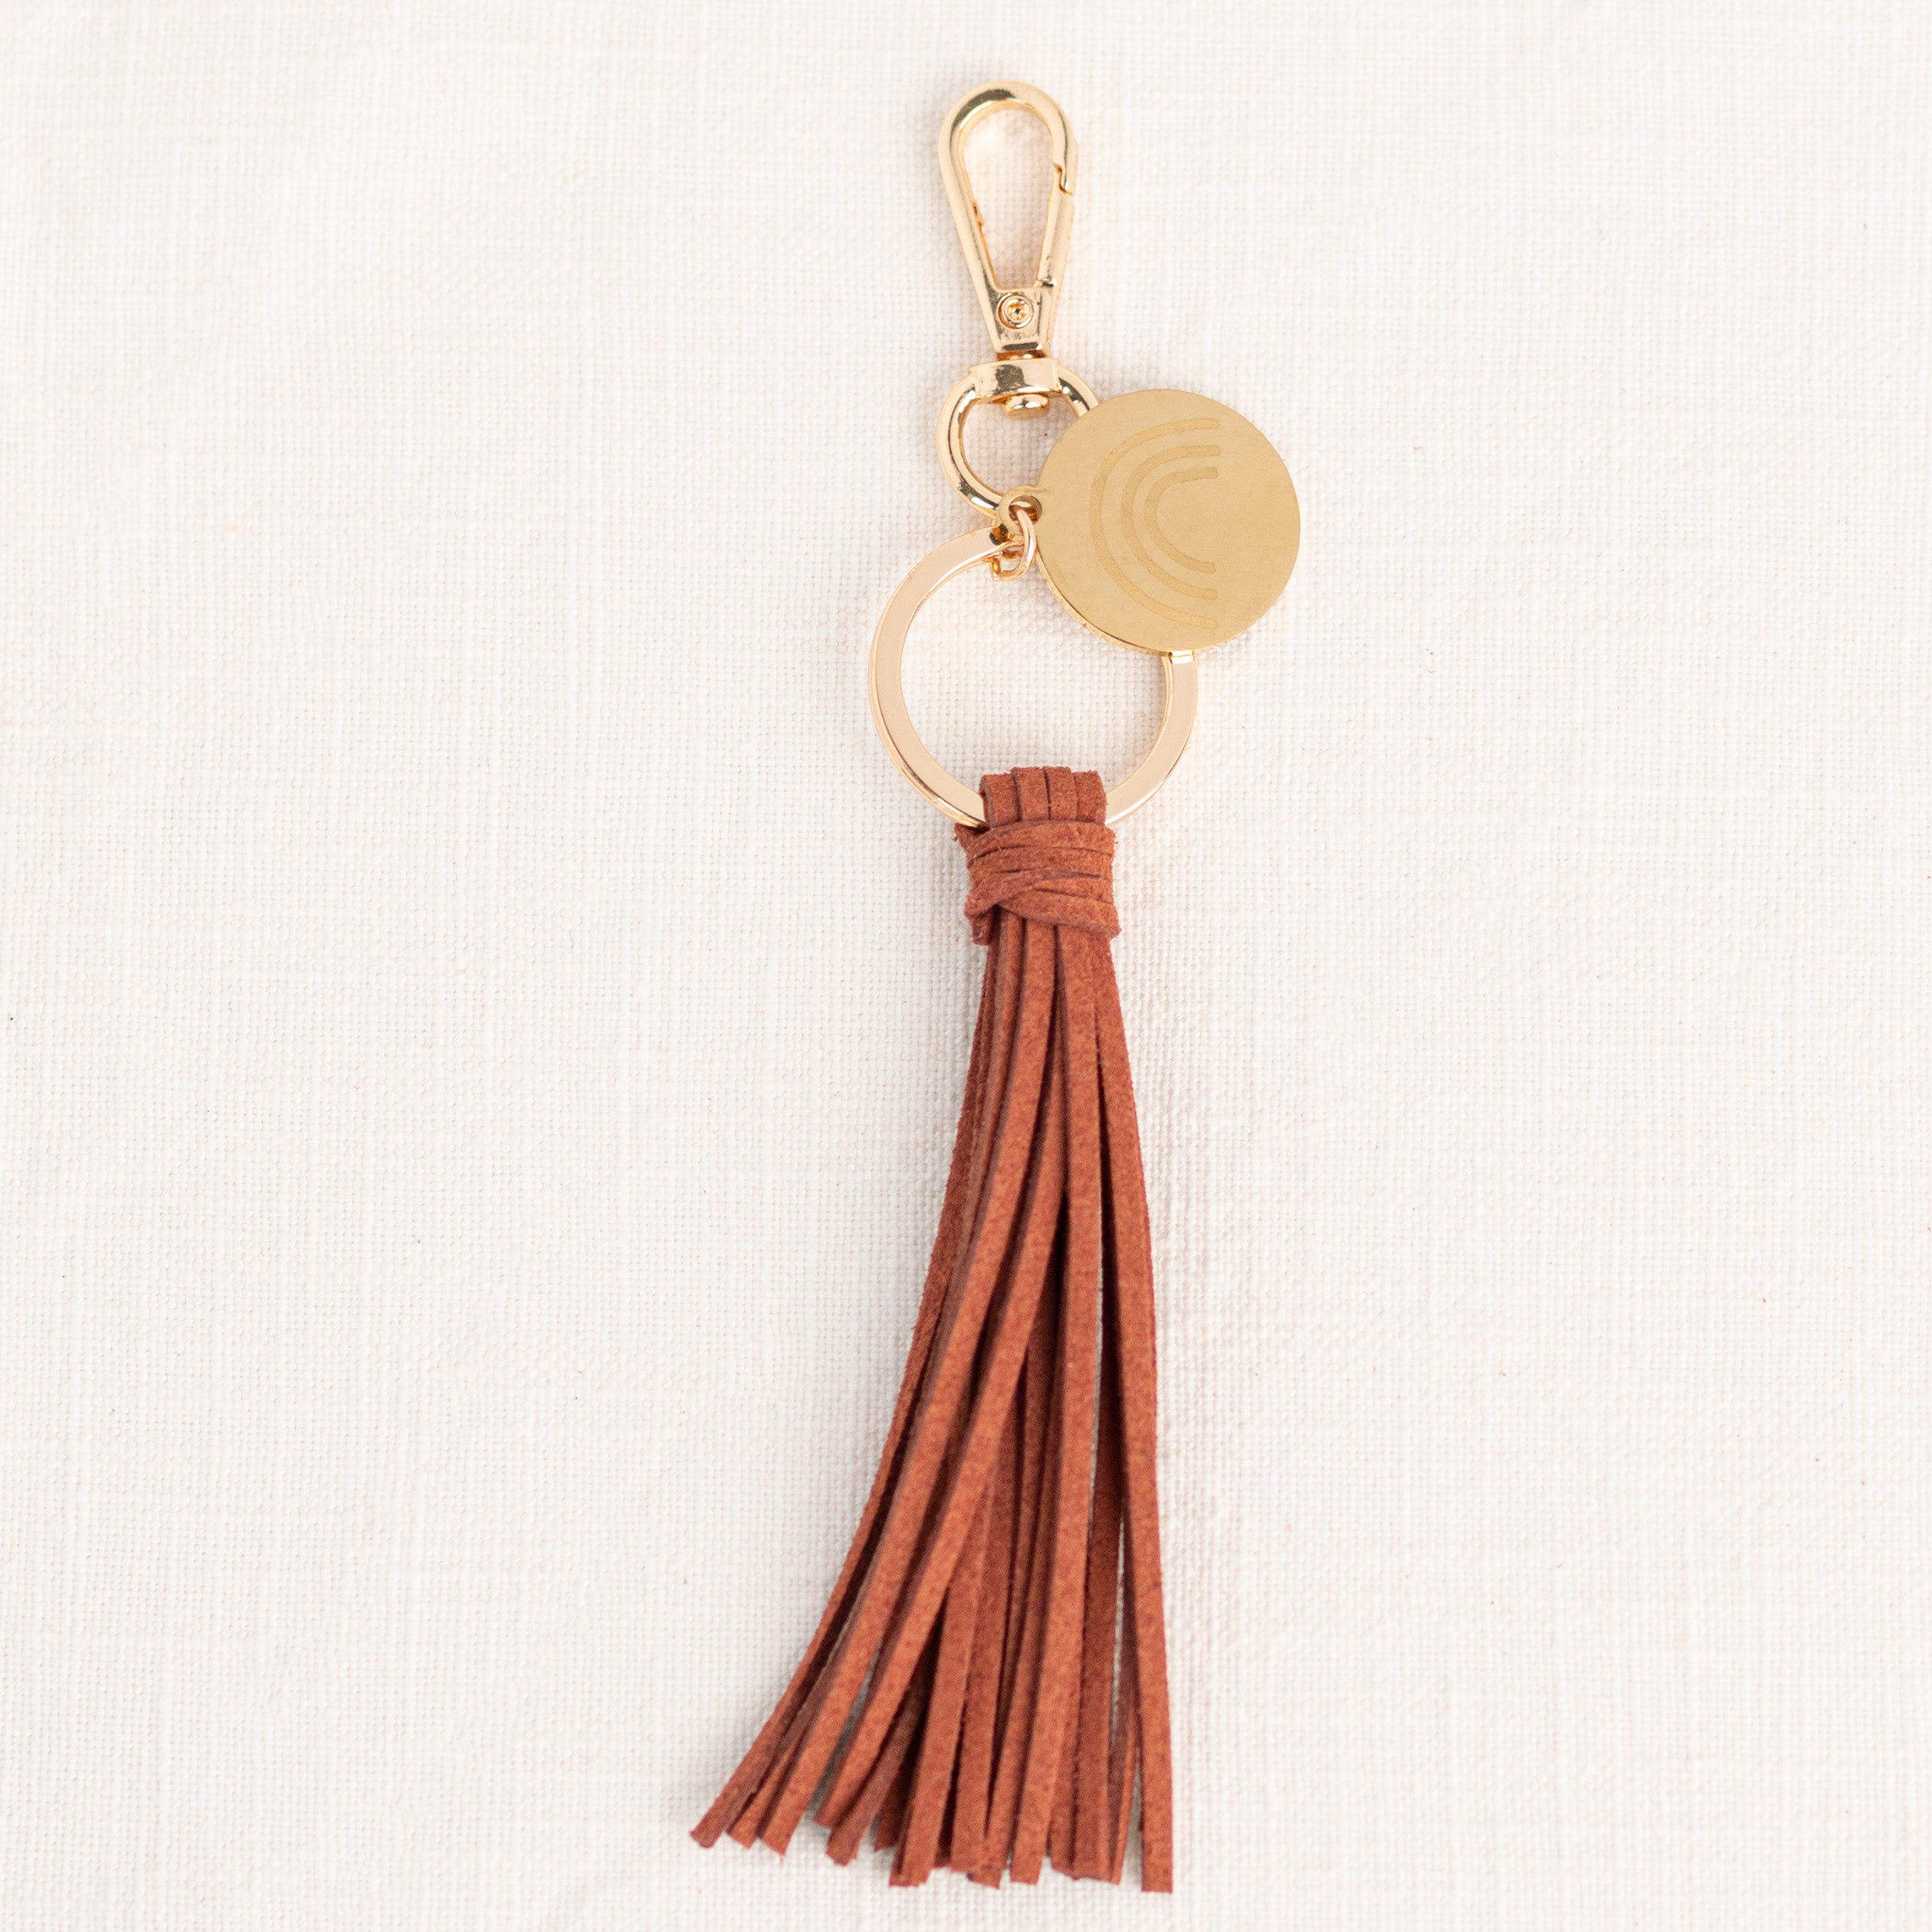 Keychain Diffusers - Put on Love Designs